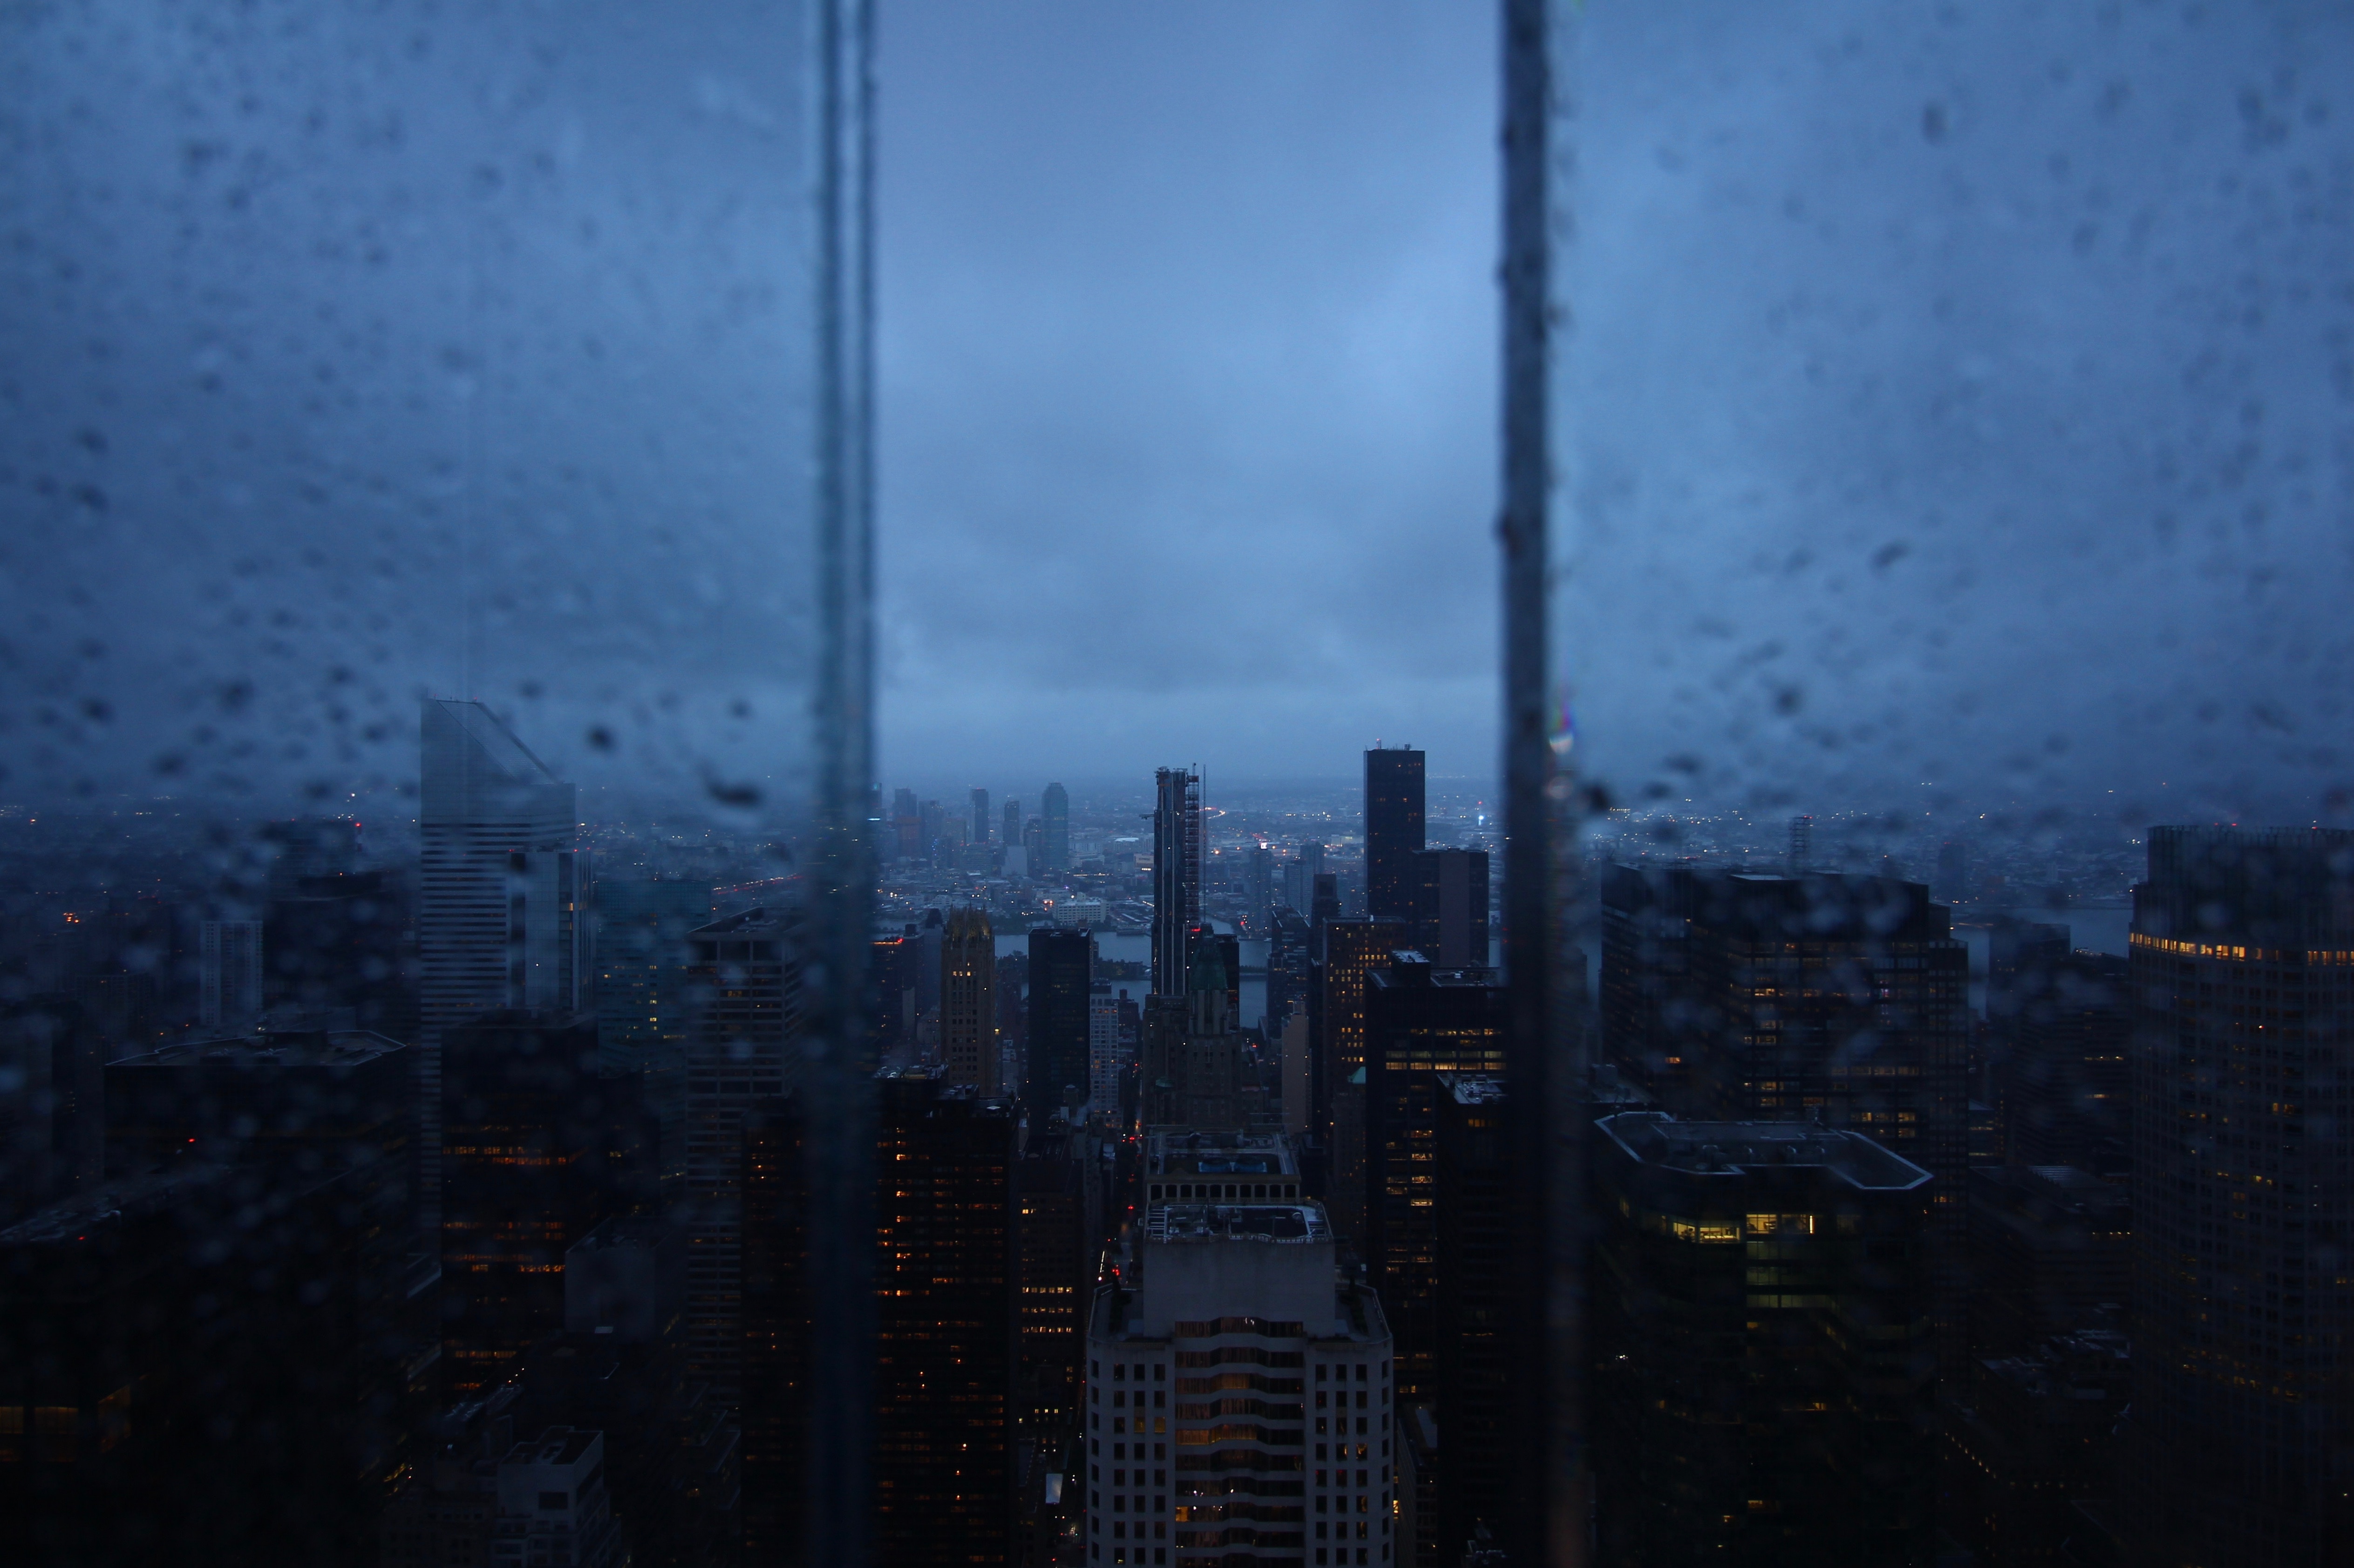 rain, night city, skyscrapers, view from above, window, cities cellphone